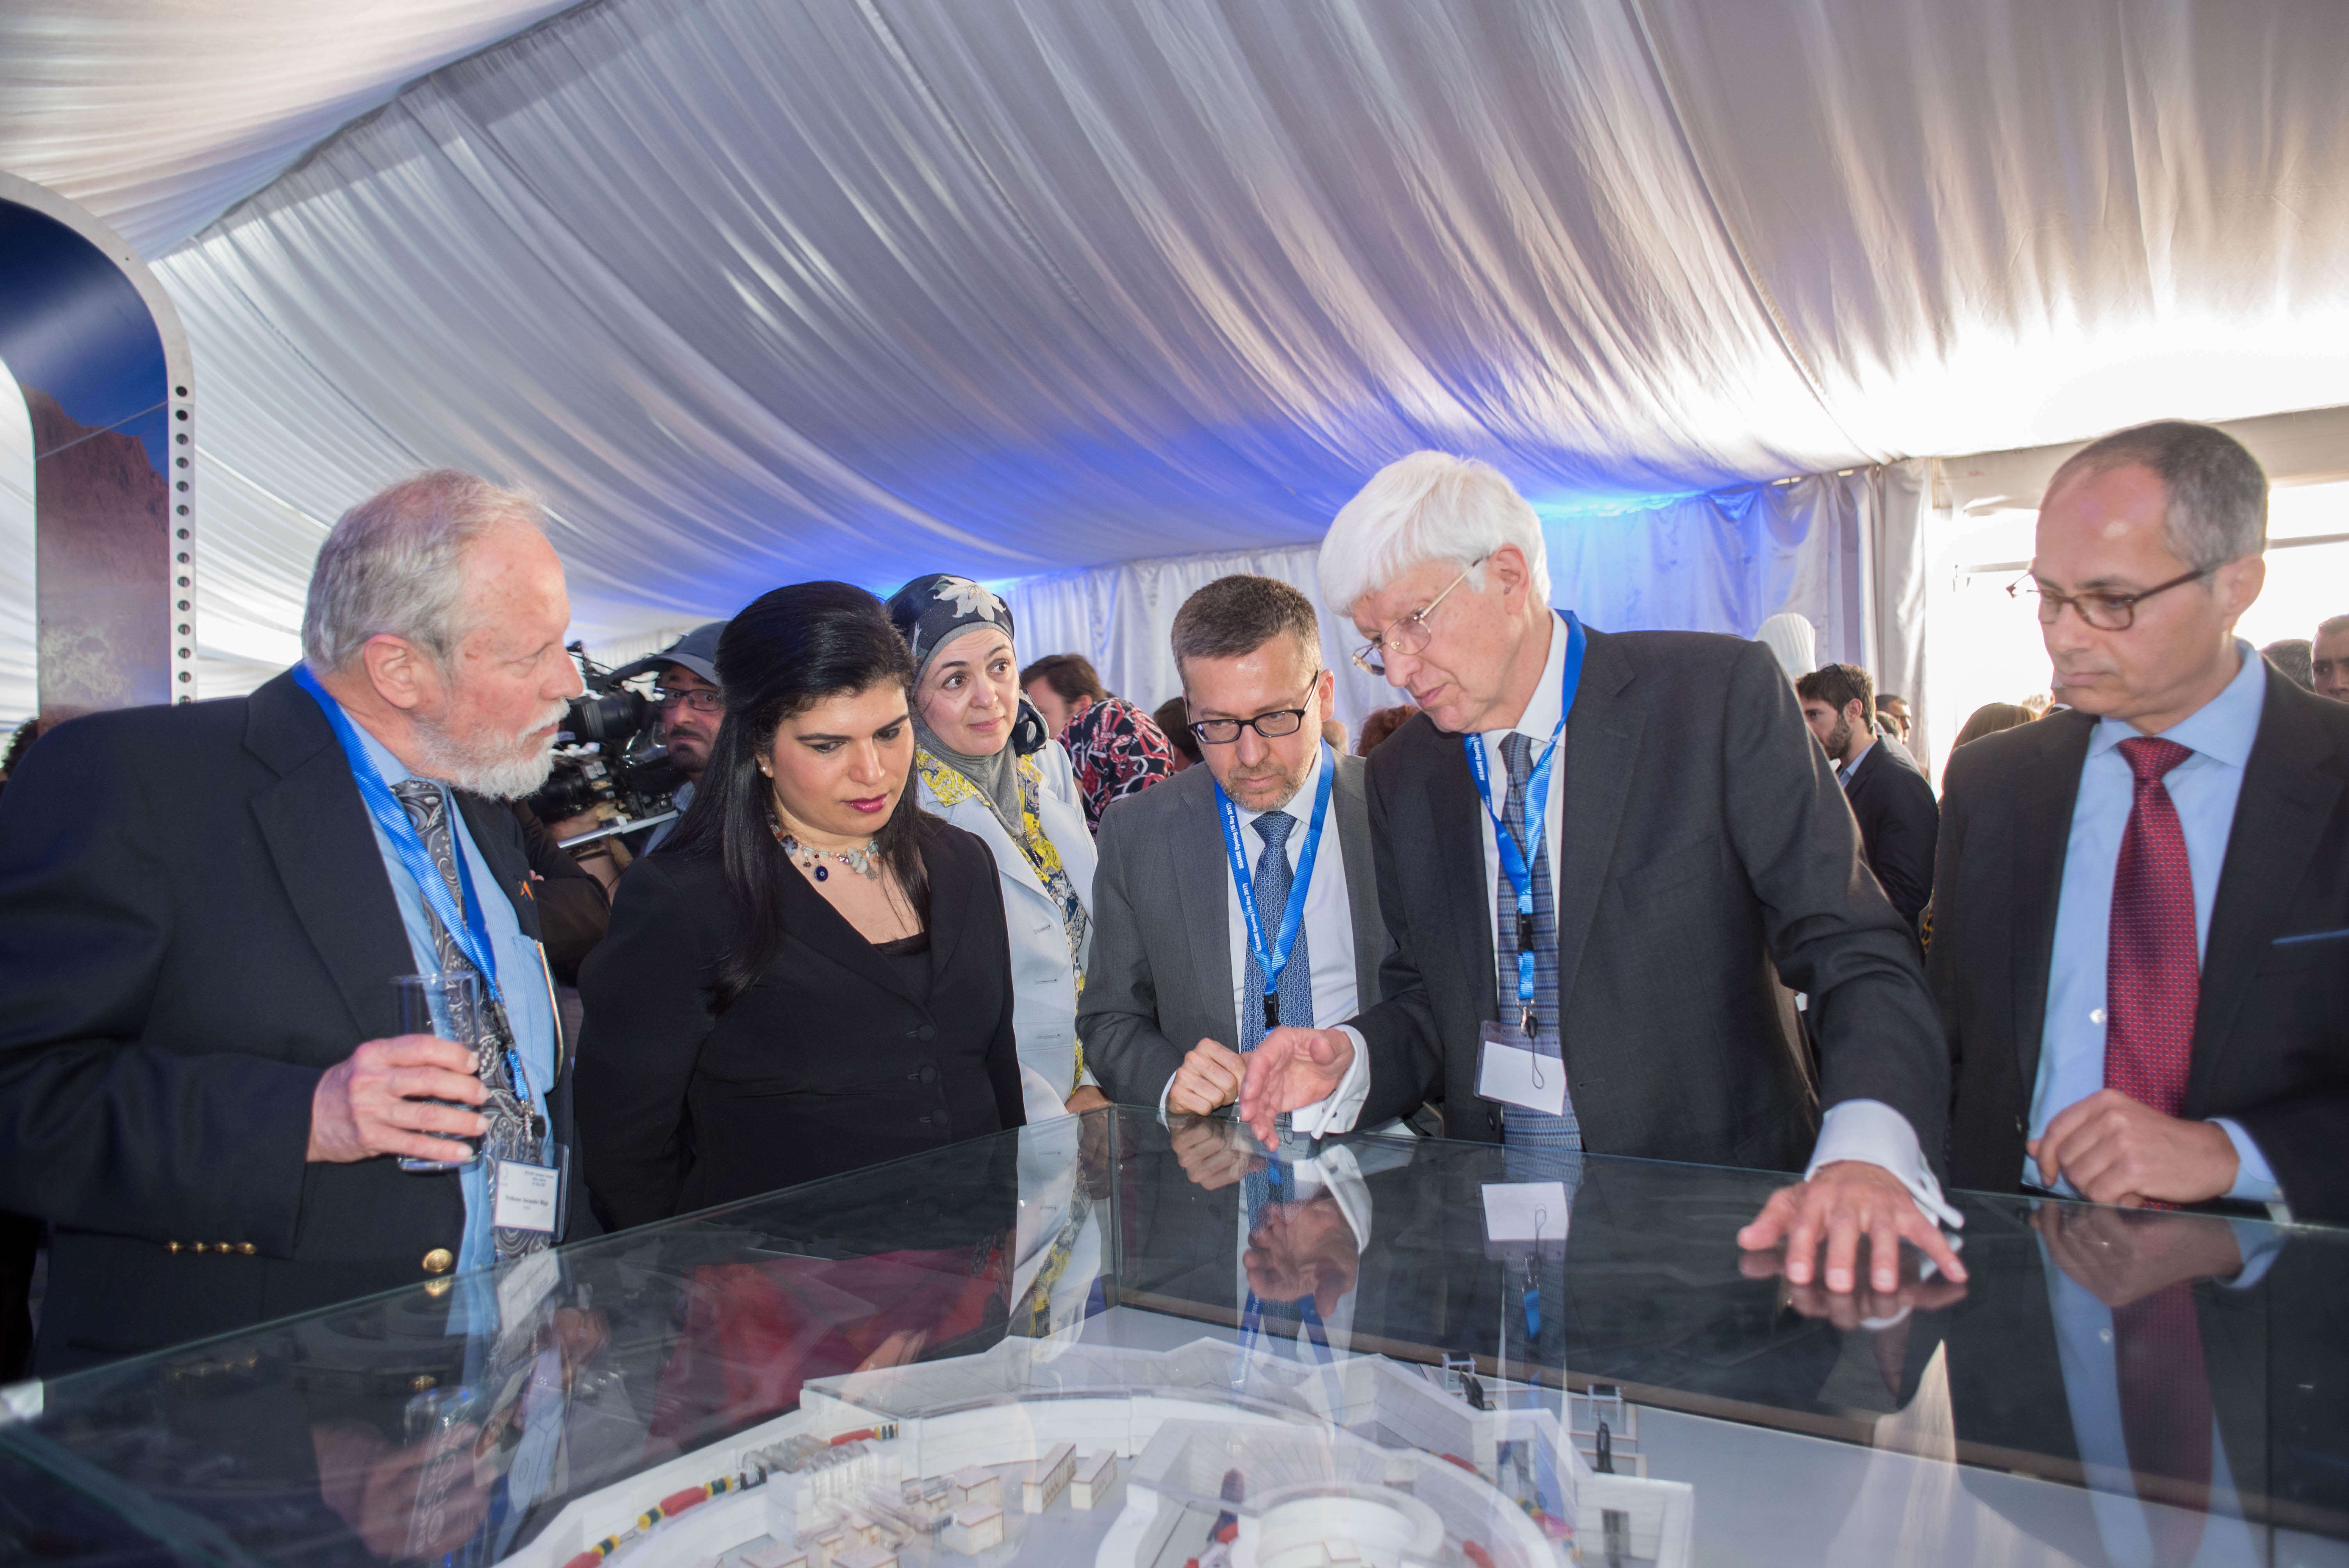 © Joe Niemela/ICTP-UNESCO: The President of the Council explaining the model of the SESAME accelerator with (on his right) the EC Commissioner for Research, Science and Innovation and HRH Princess Sumaya bint El Hassan (front)